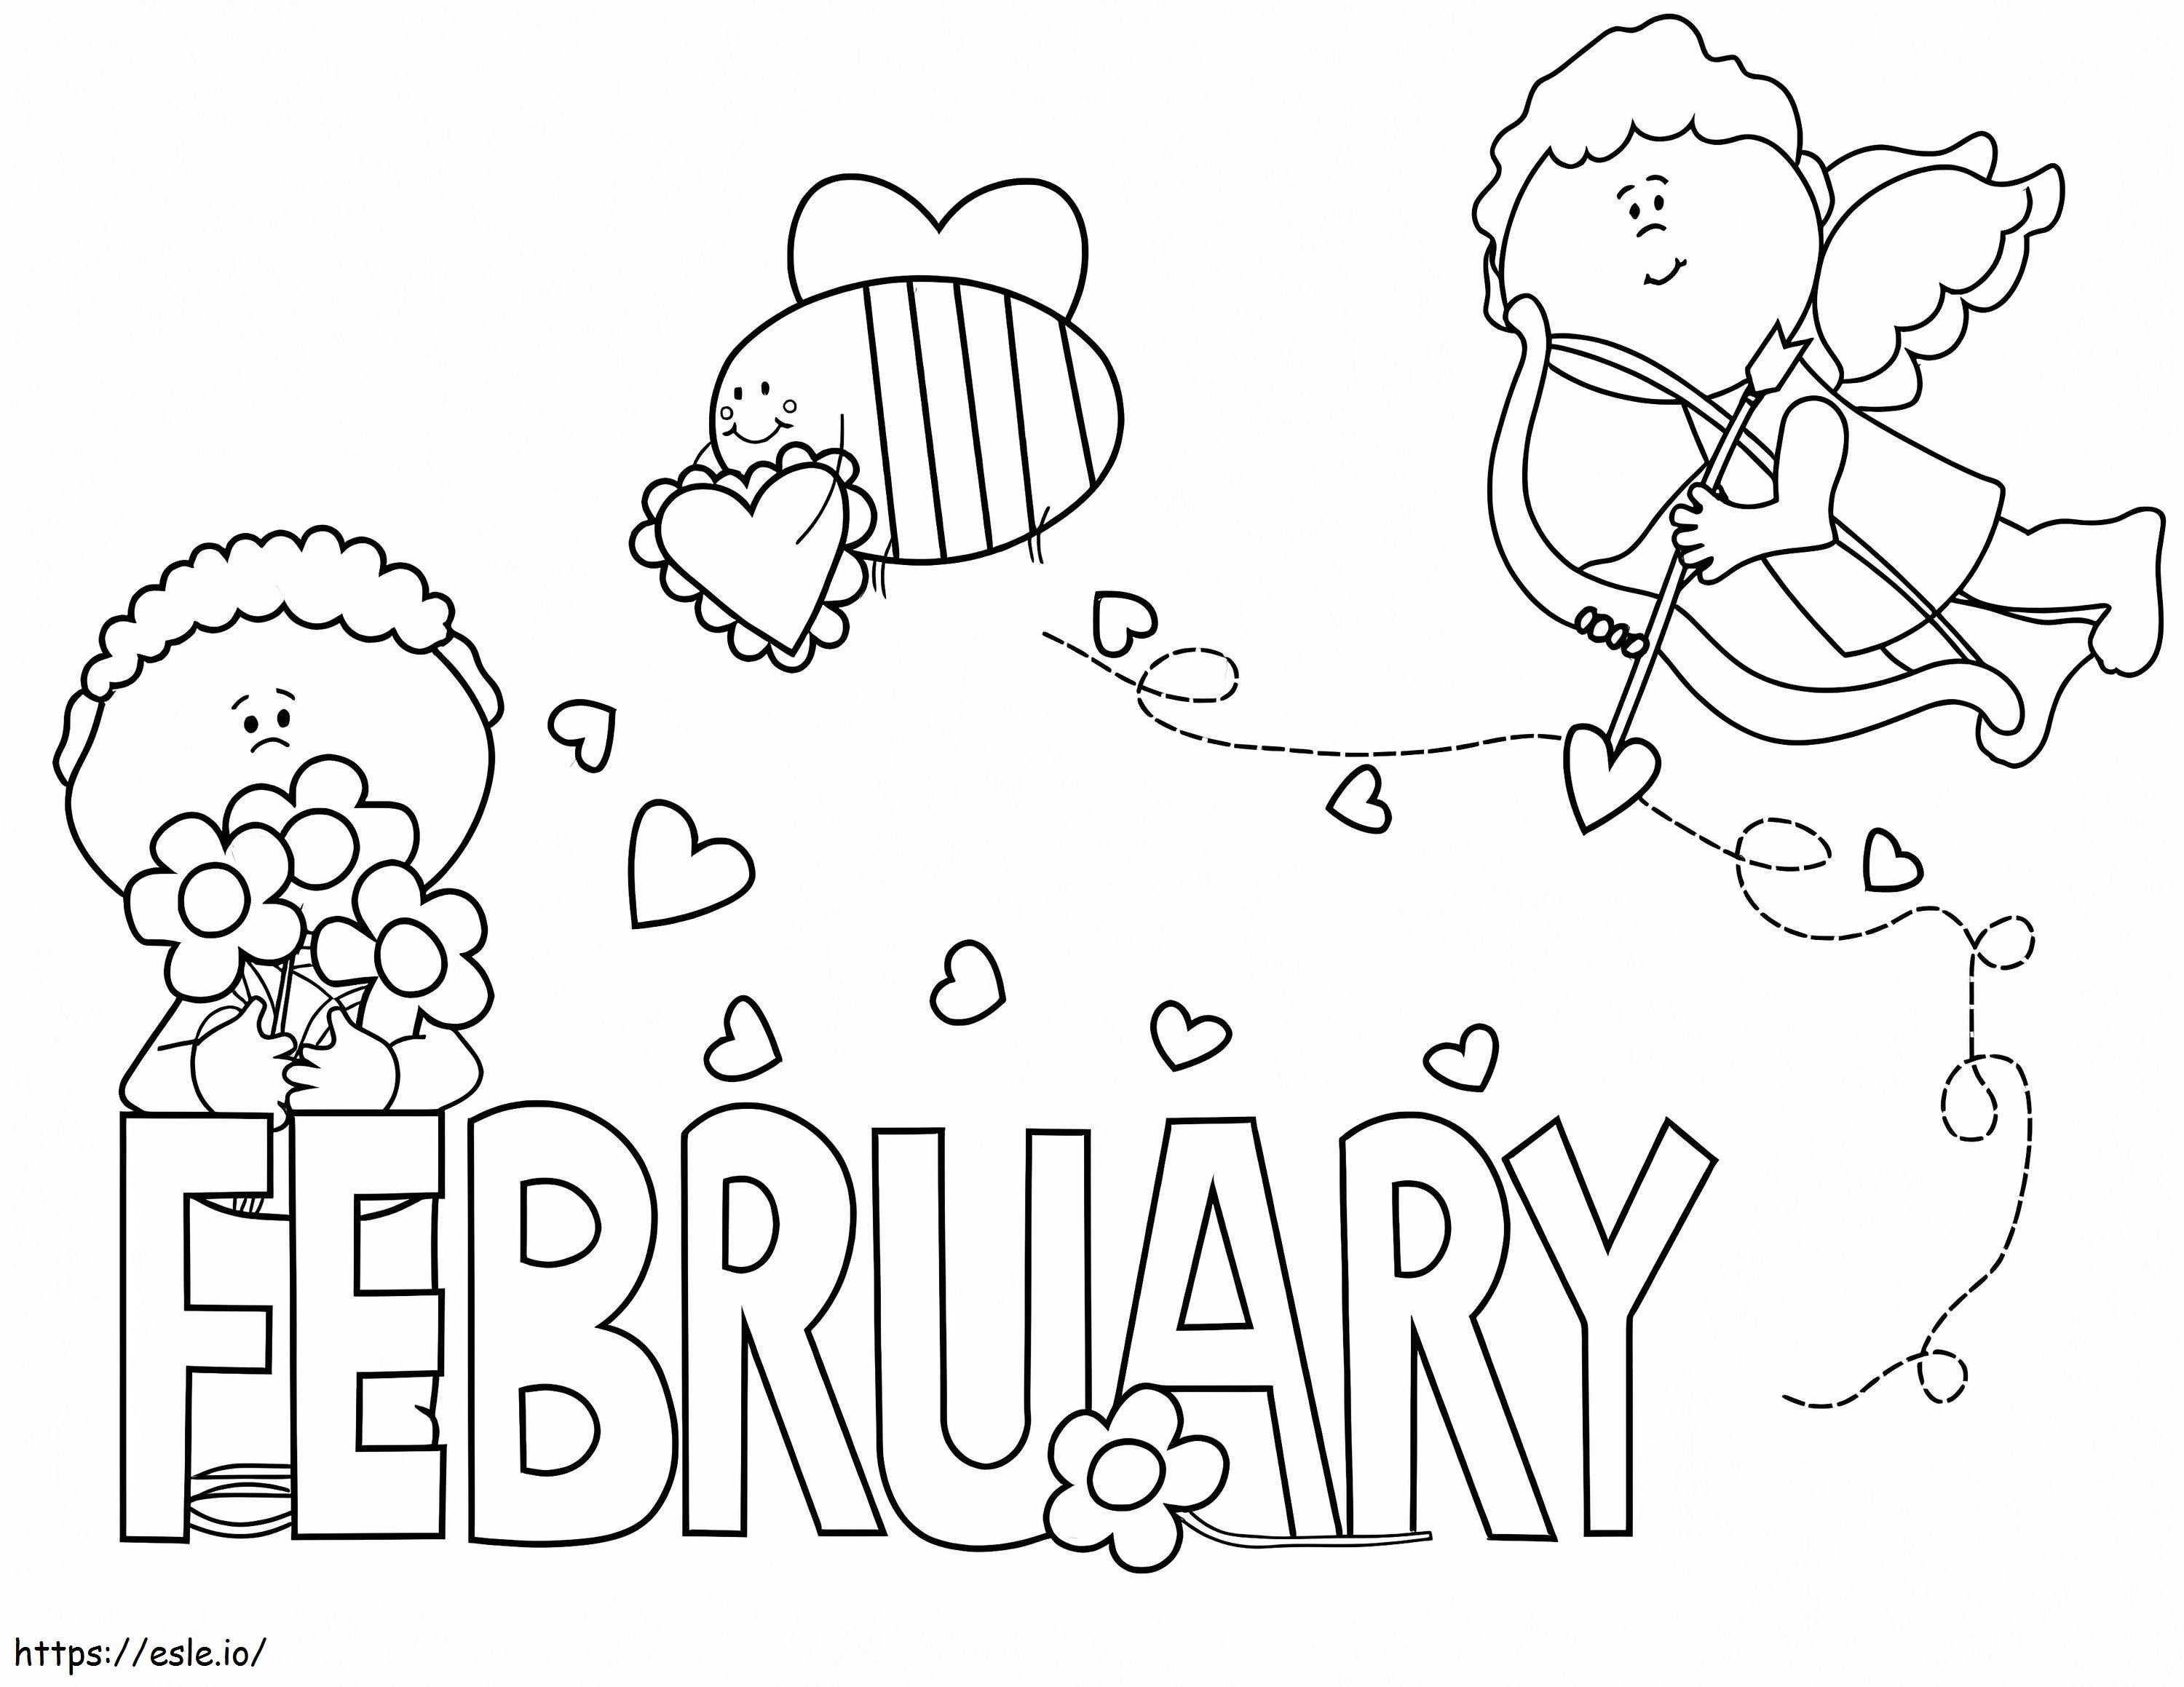 Adorable February coloring page